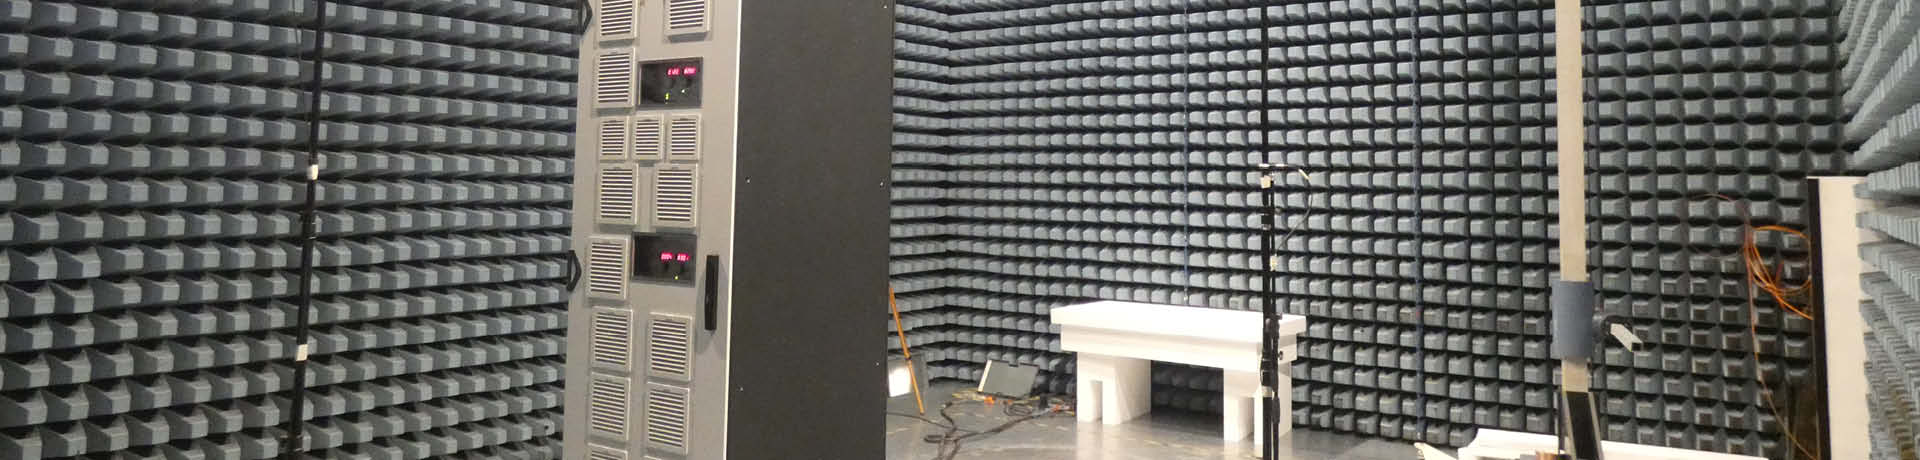 An acoustic power test in an anechoic chamber